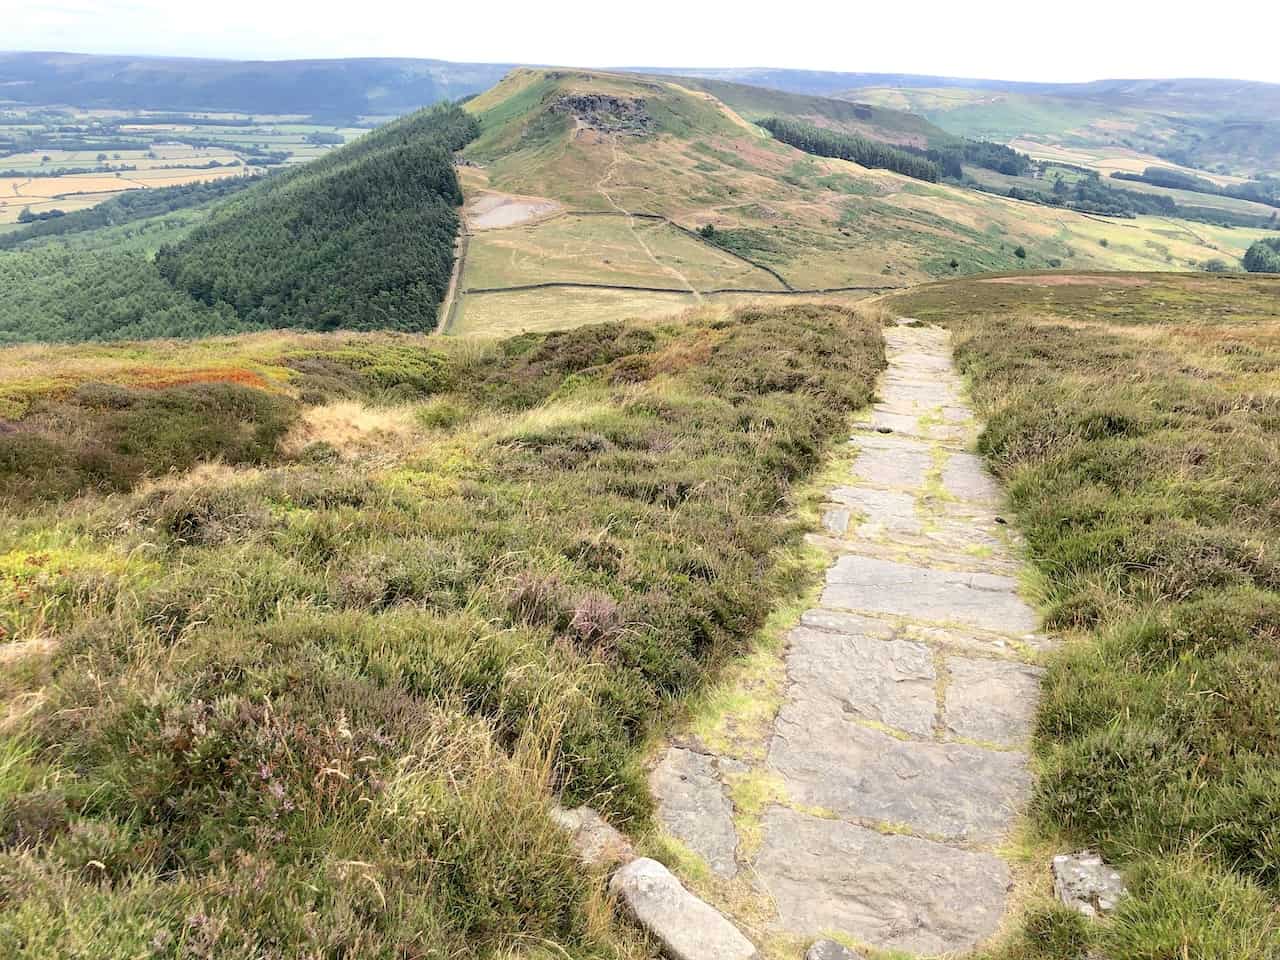 Embarking on this Wainstones walk, heading east and leaving Cold Moor via the Cleveland Way, leads to a stimulating ascent up Hasty Bank to reach the Wainstones.